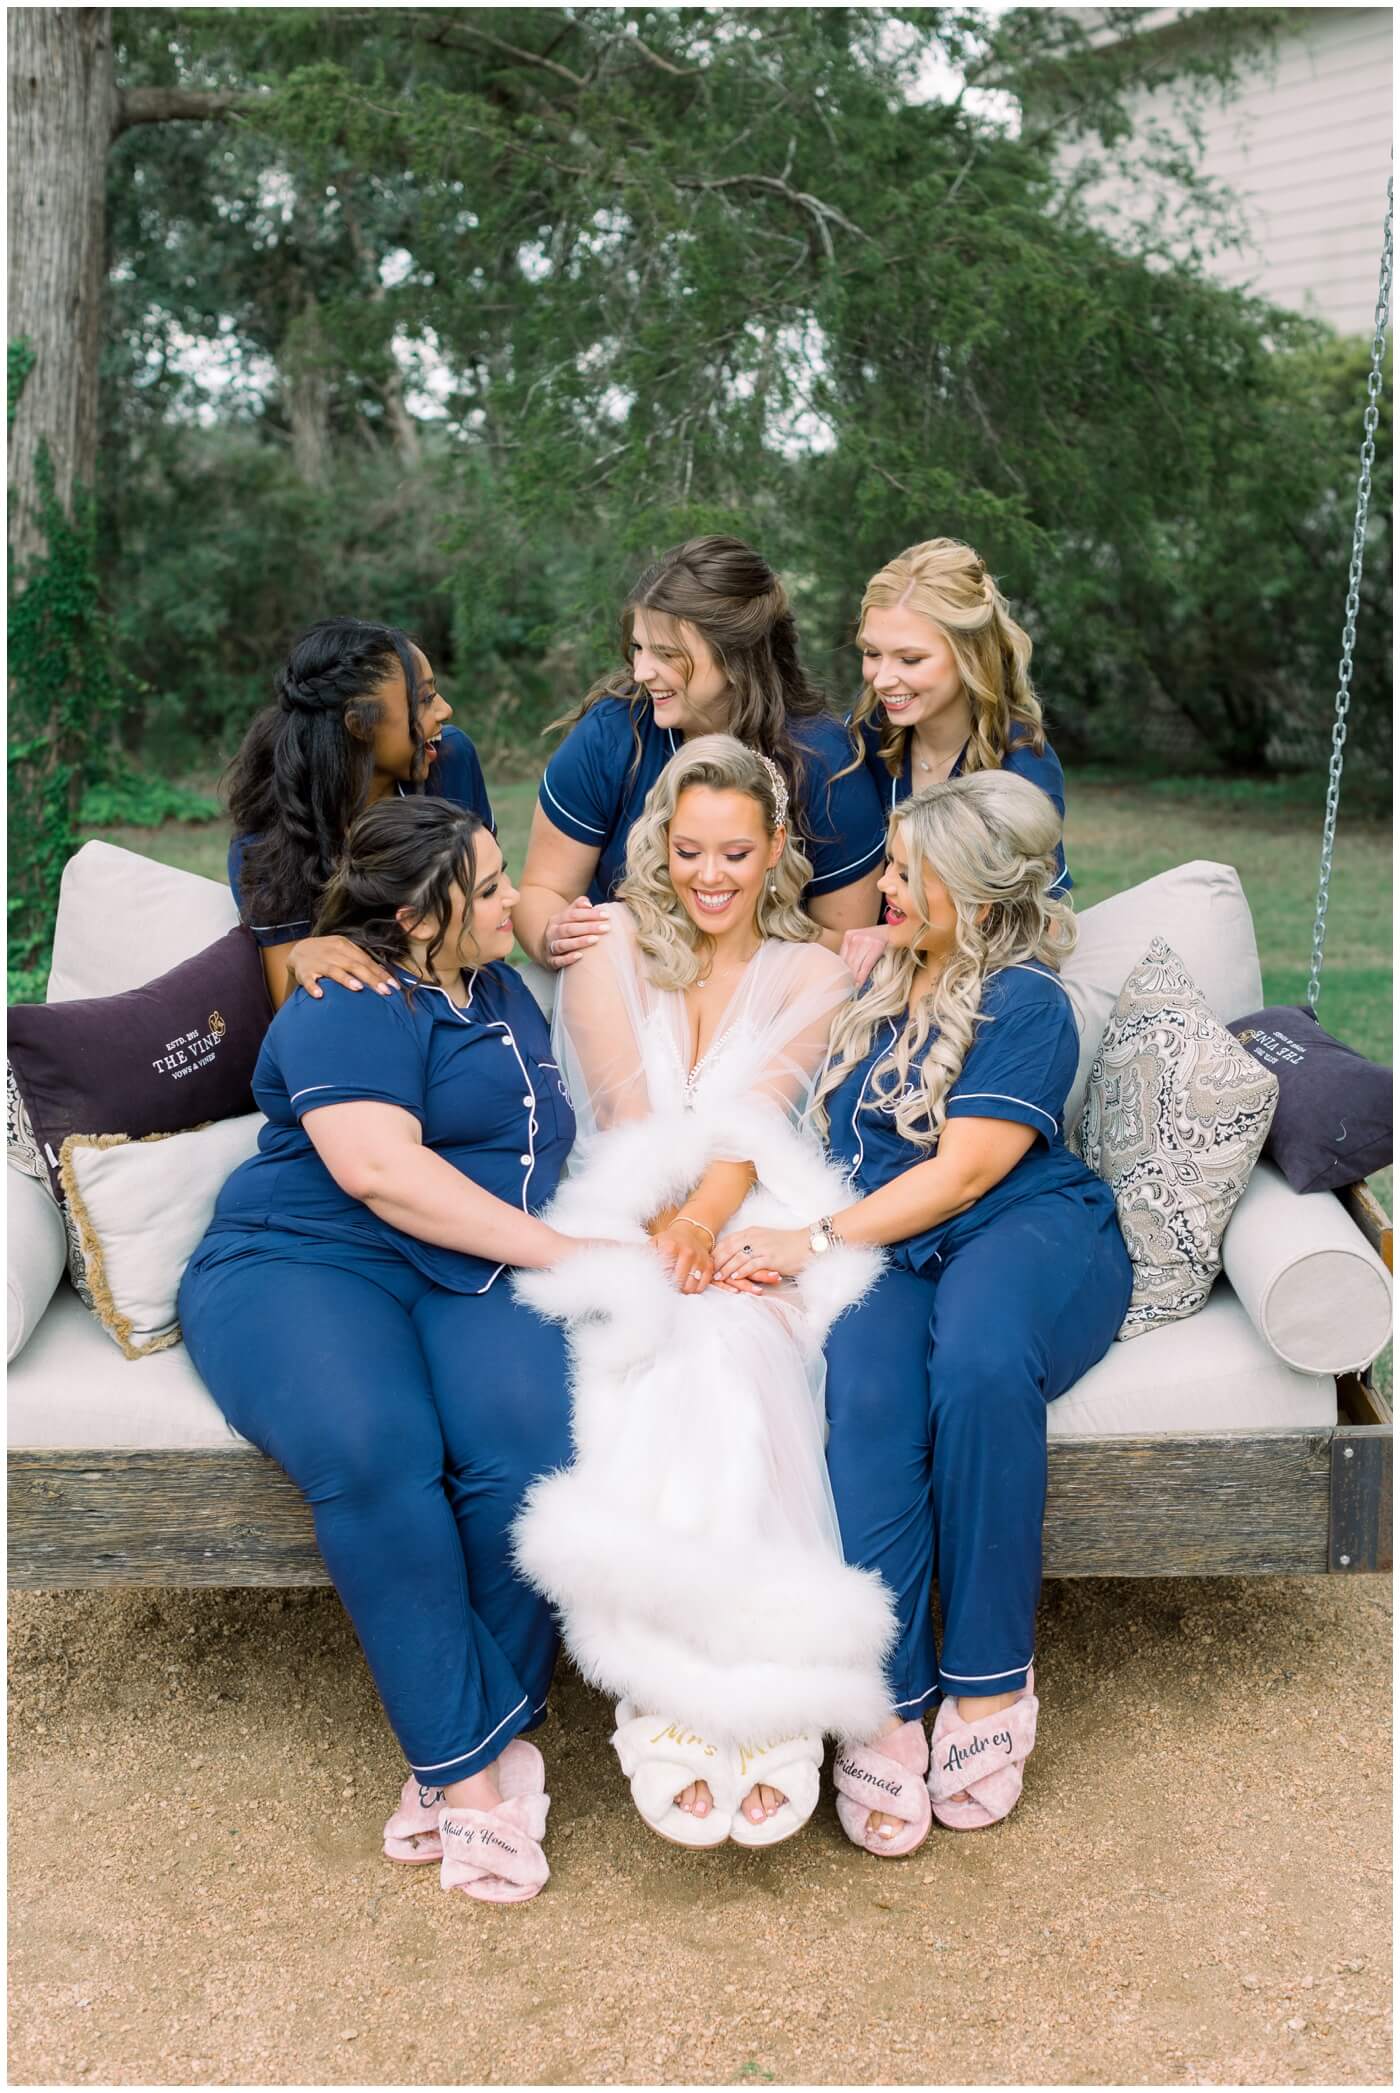 Houston Wedding at The Vine | a bride is laughing with her bridesmaids